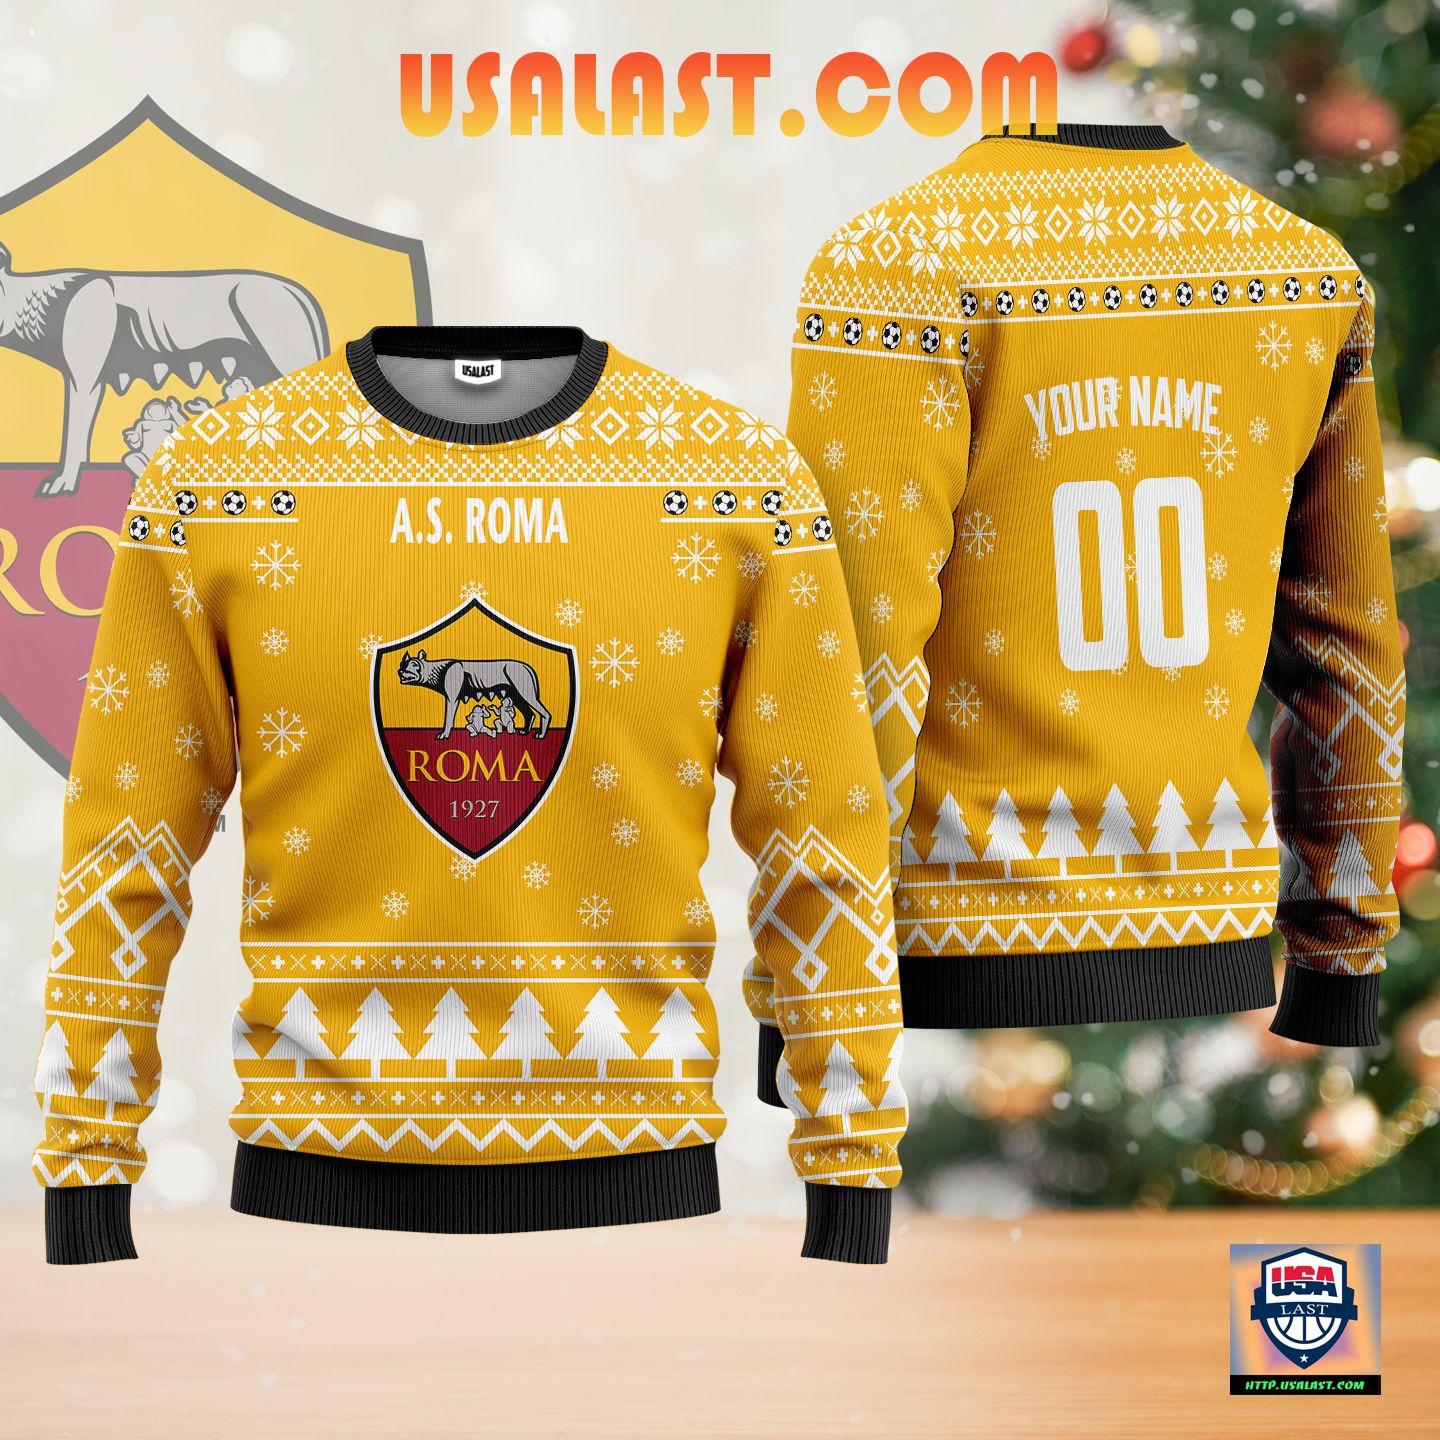 Awesome A.S Roma Personalized Ugly Christmas Sweater Yellow Version